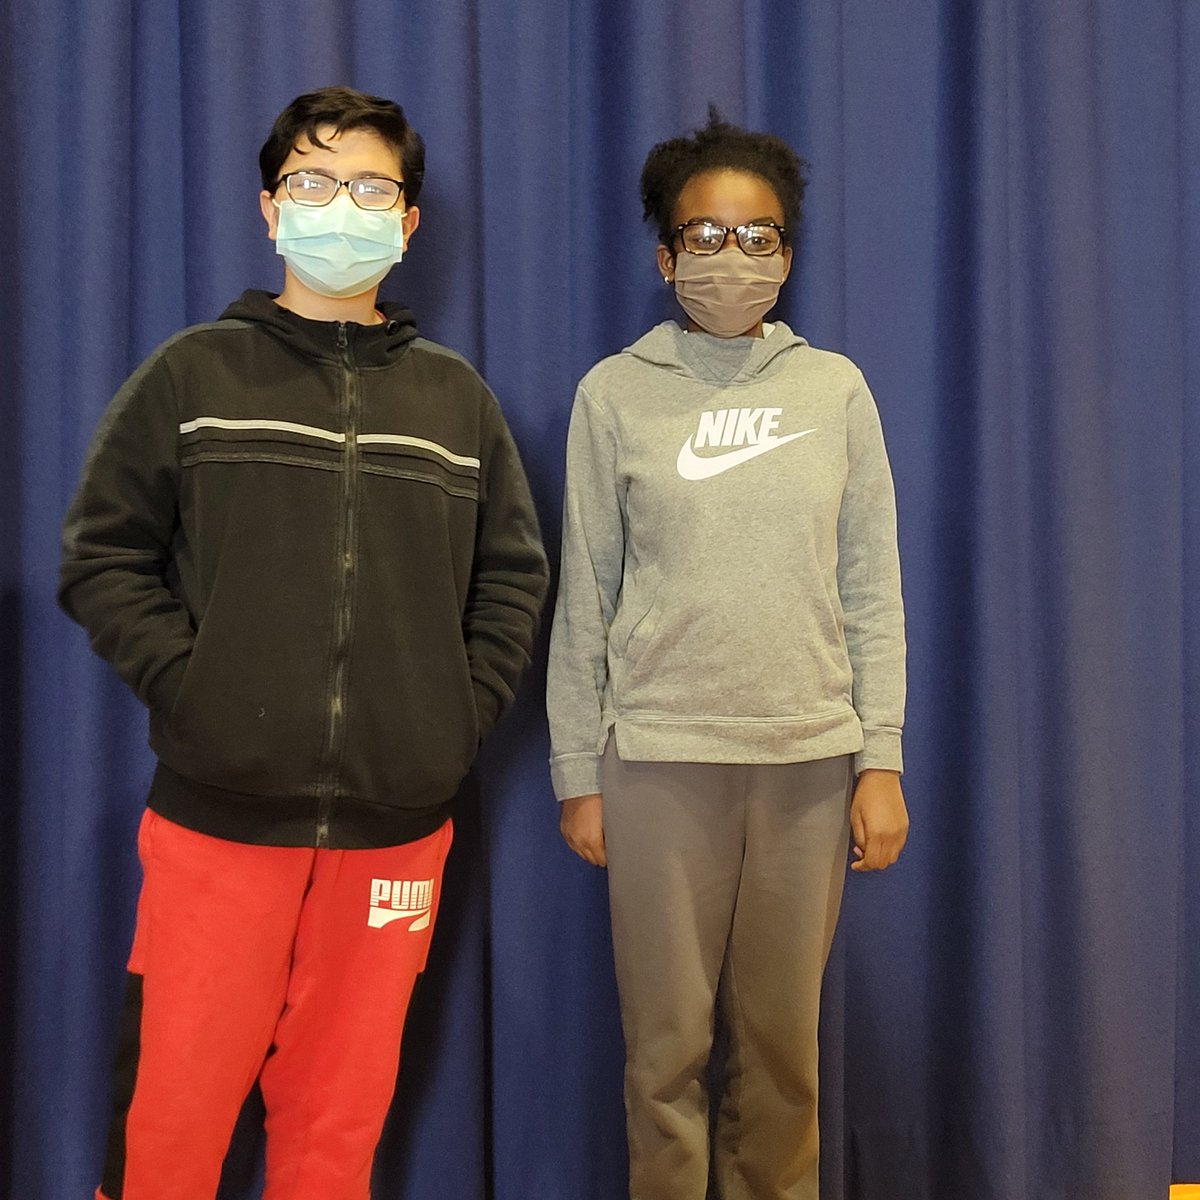 The judges had a difficult task in choosing which of the #PSIS499Q students would move on to #SoapboxNYC. After a tie-breaking vote from Dr. Daytona- Mohammed & Amoy were selected! We can't wait to hear you on the #MainStage! #QNBCO @QueensNorthBCO @NYCSchoolsD25 @Civics_For_All